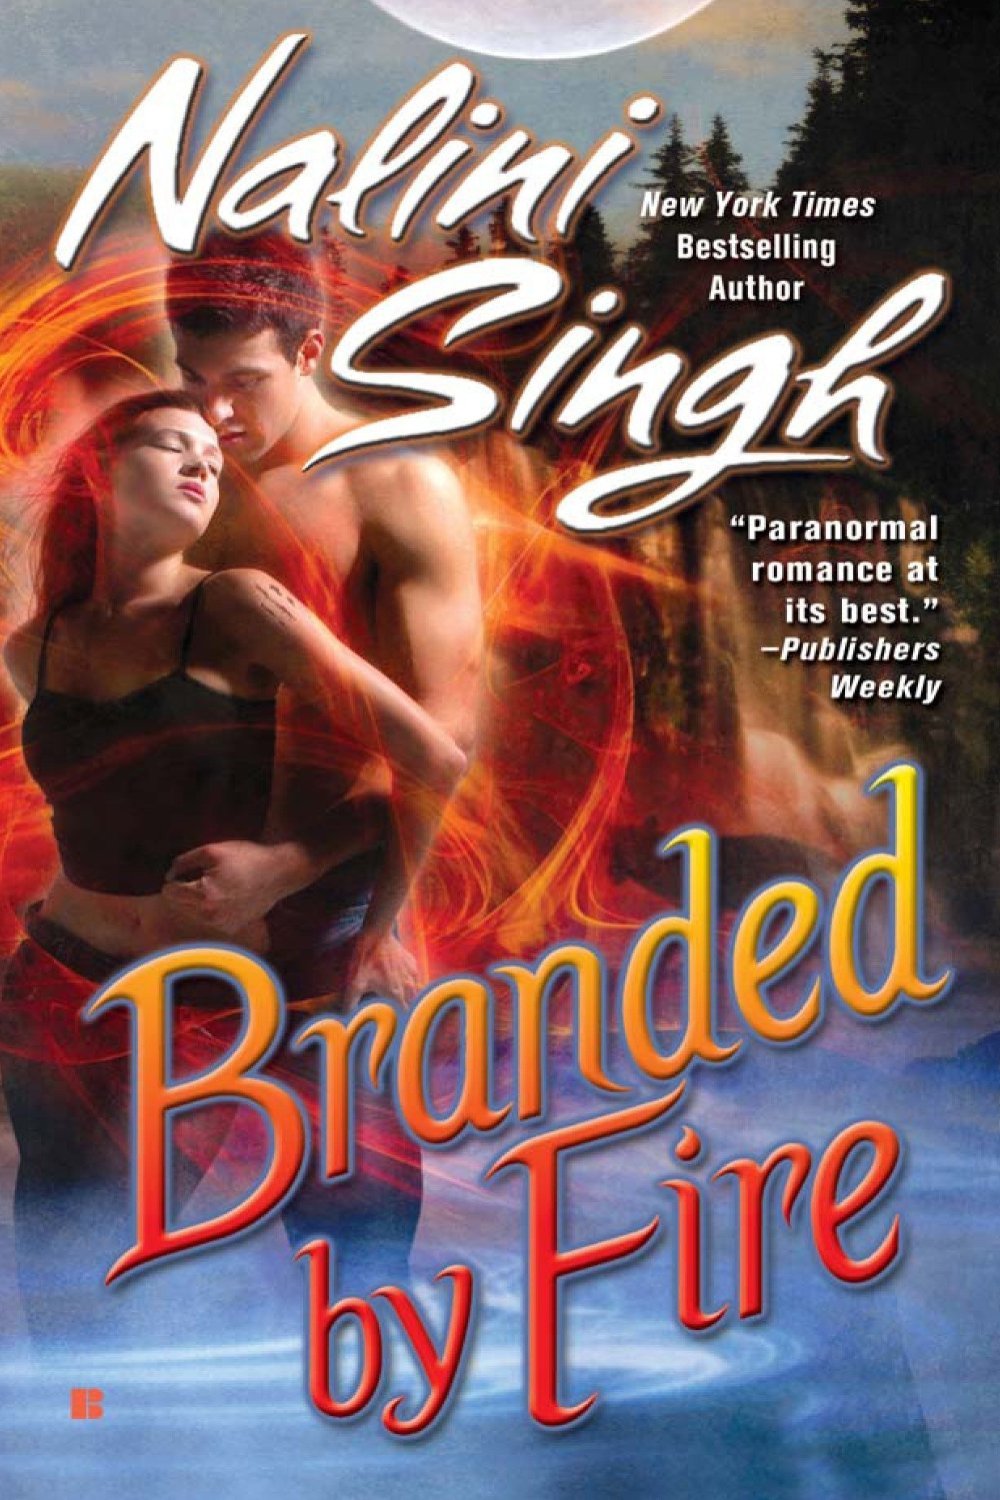 S2 E14 Branded by Fire by Nalini Singh